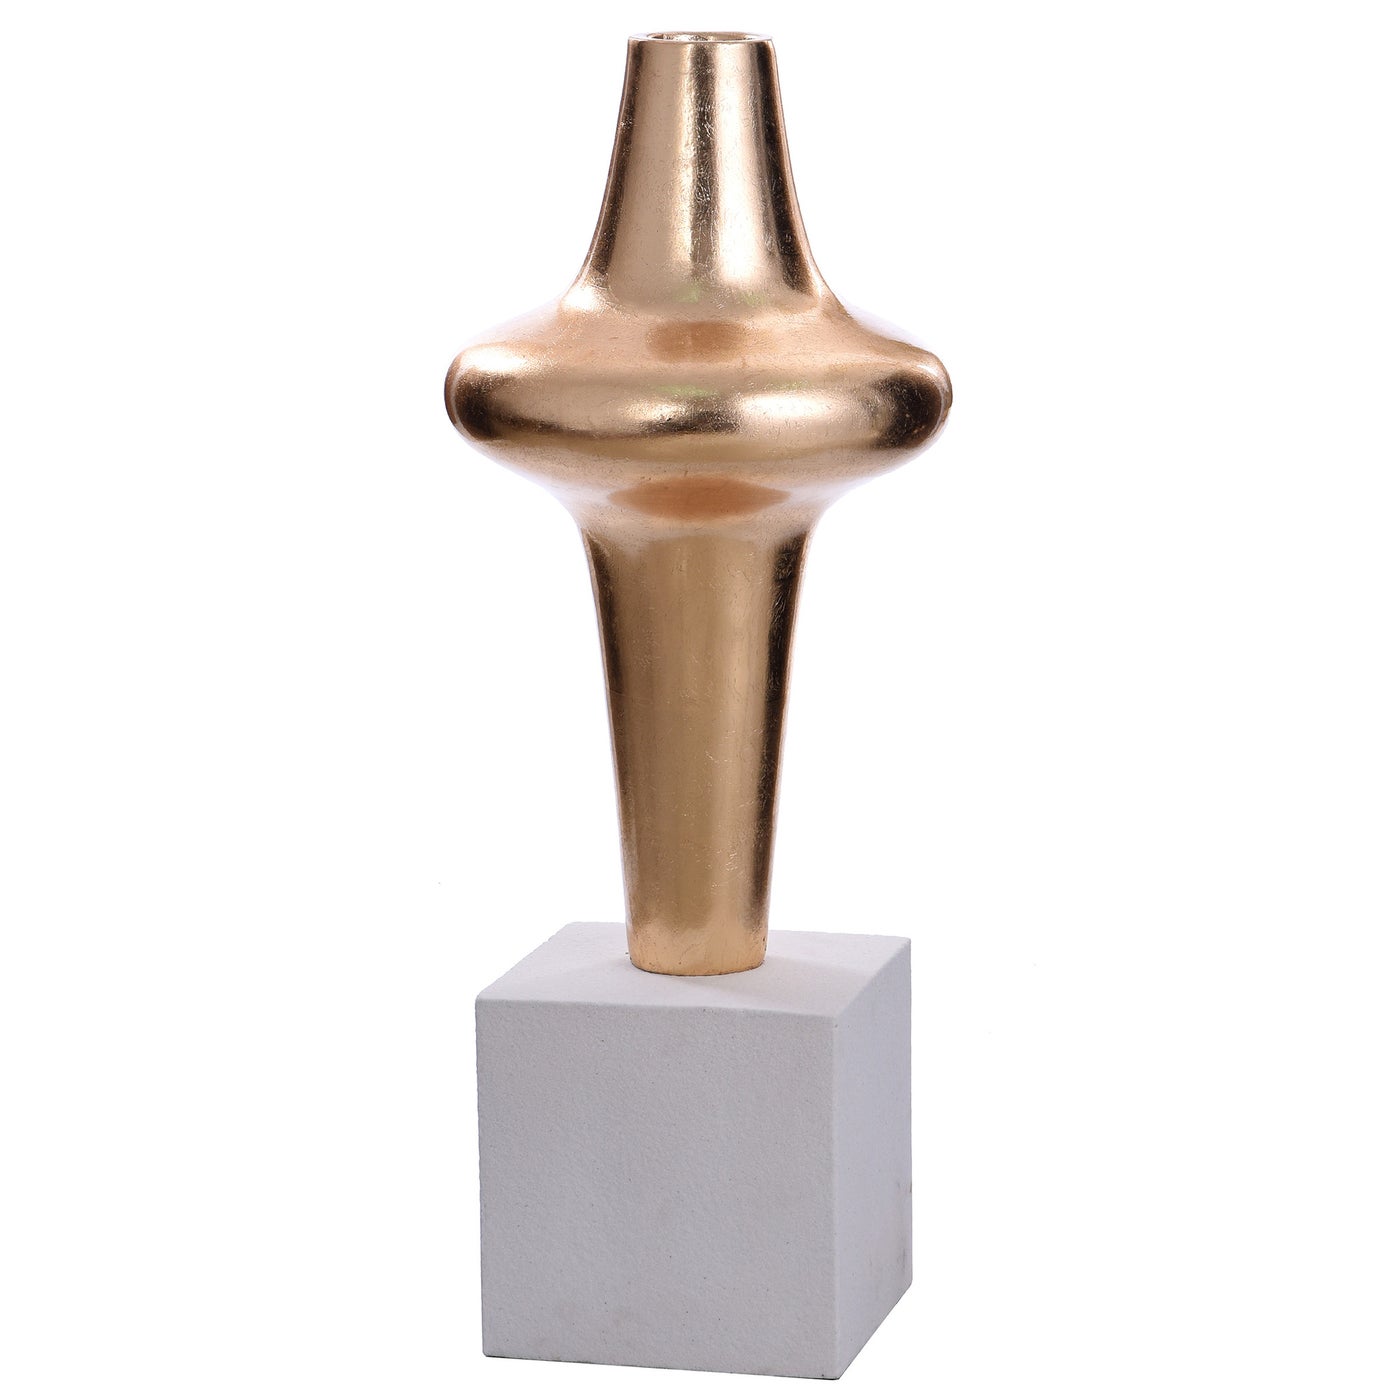 Vase- Large | Gloss Gold Finish On Resin With Frosted White Base